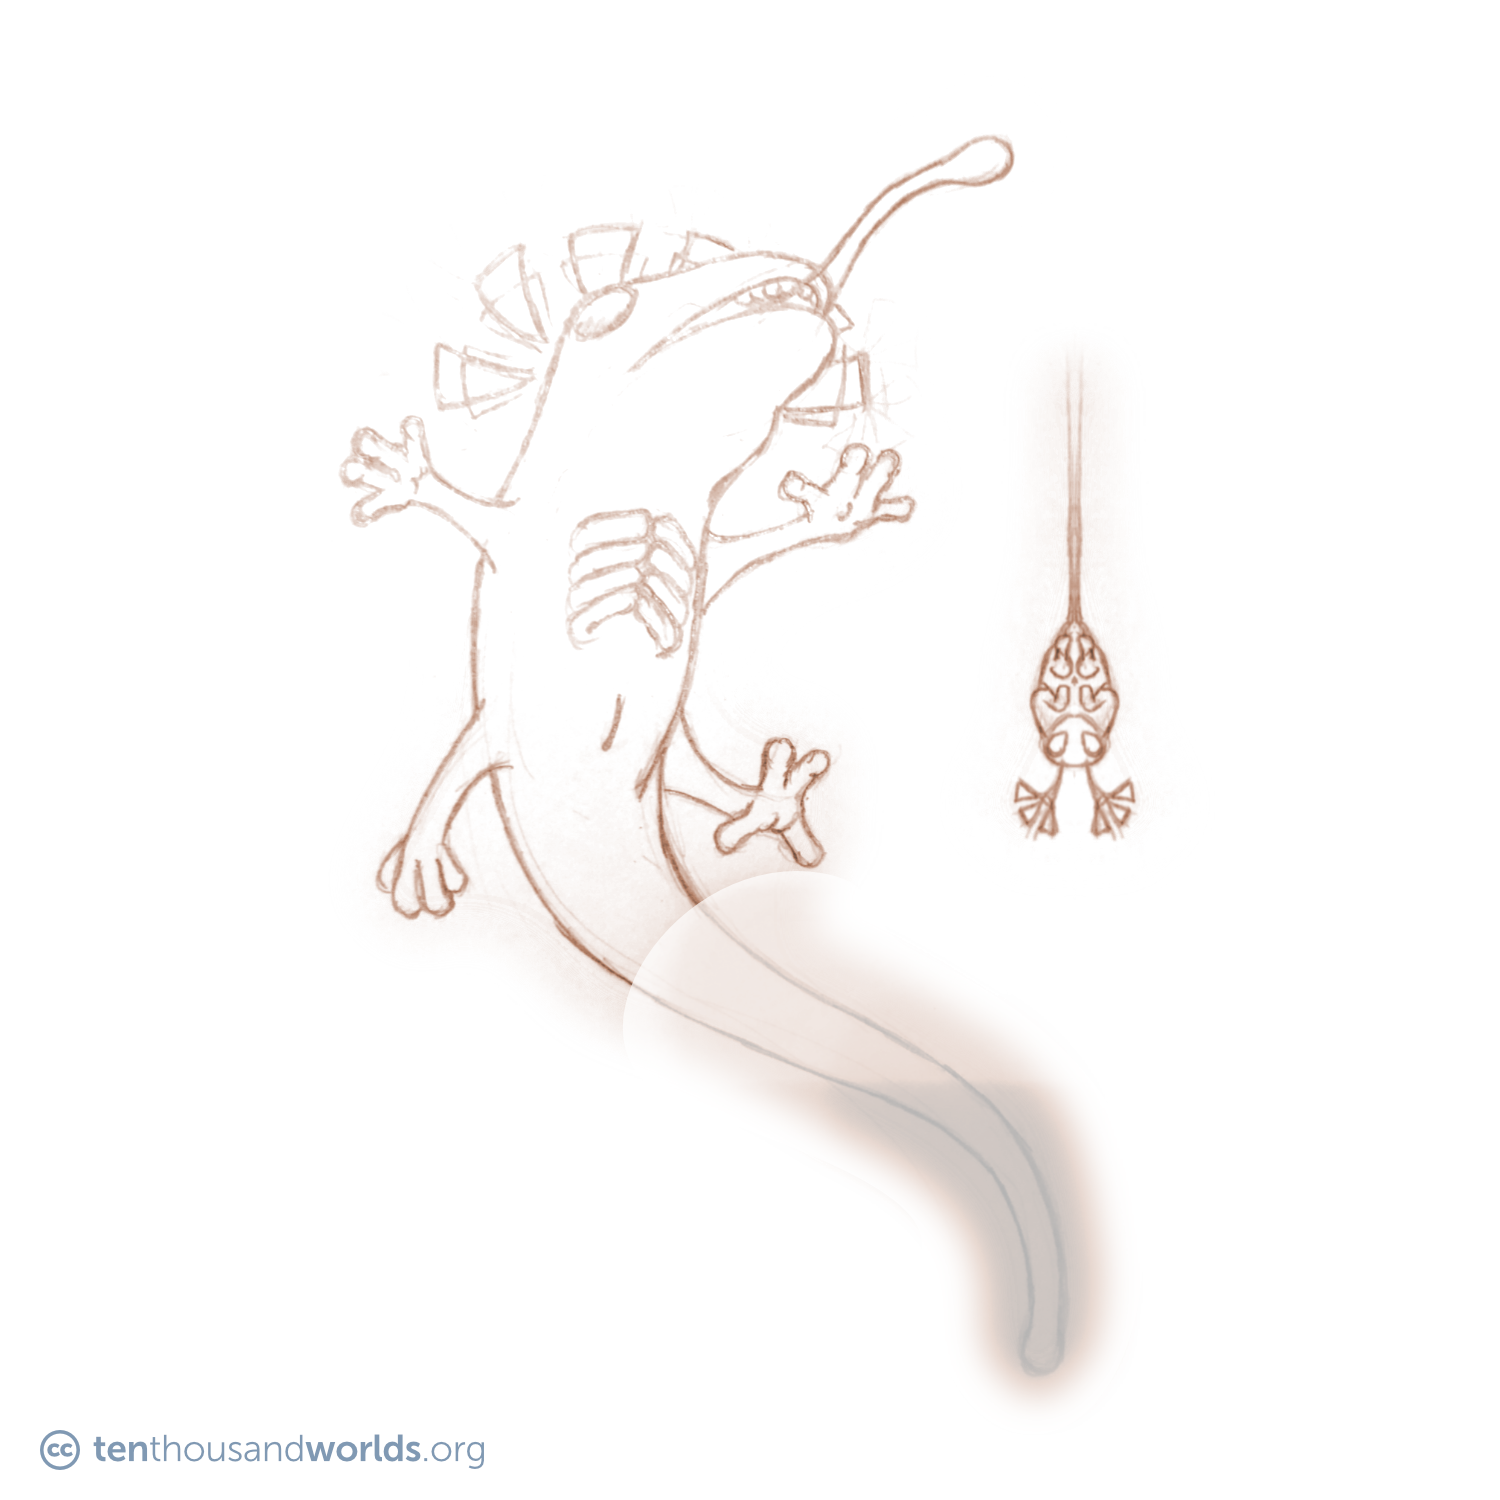 A pencil sketch of a flying salamander-like creature shoots out a long, frog-like tongue. It has prominent rib-like structures and is wreathed in a headdress of floating triangles. A tiny, grub-like creature, with antennae made of triangles, floats upside-down by a tread.